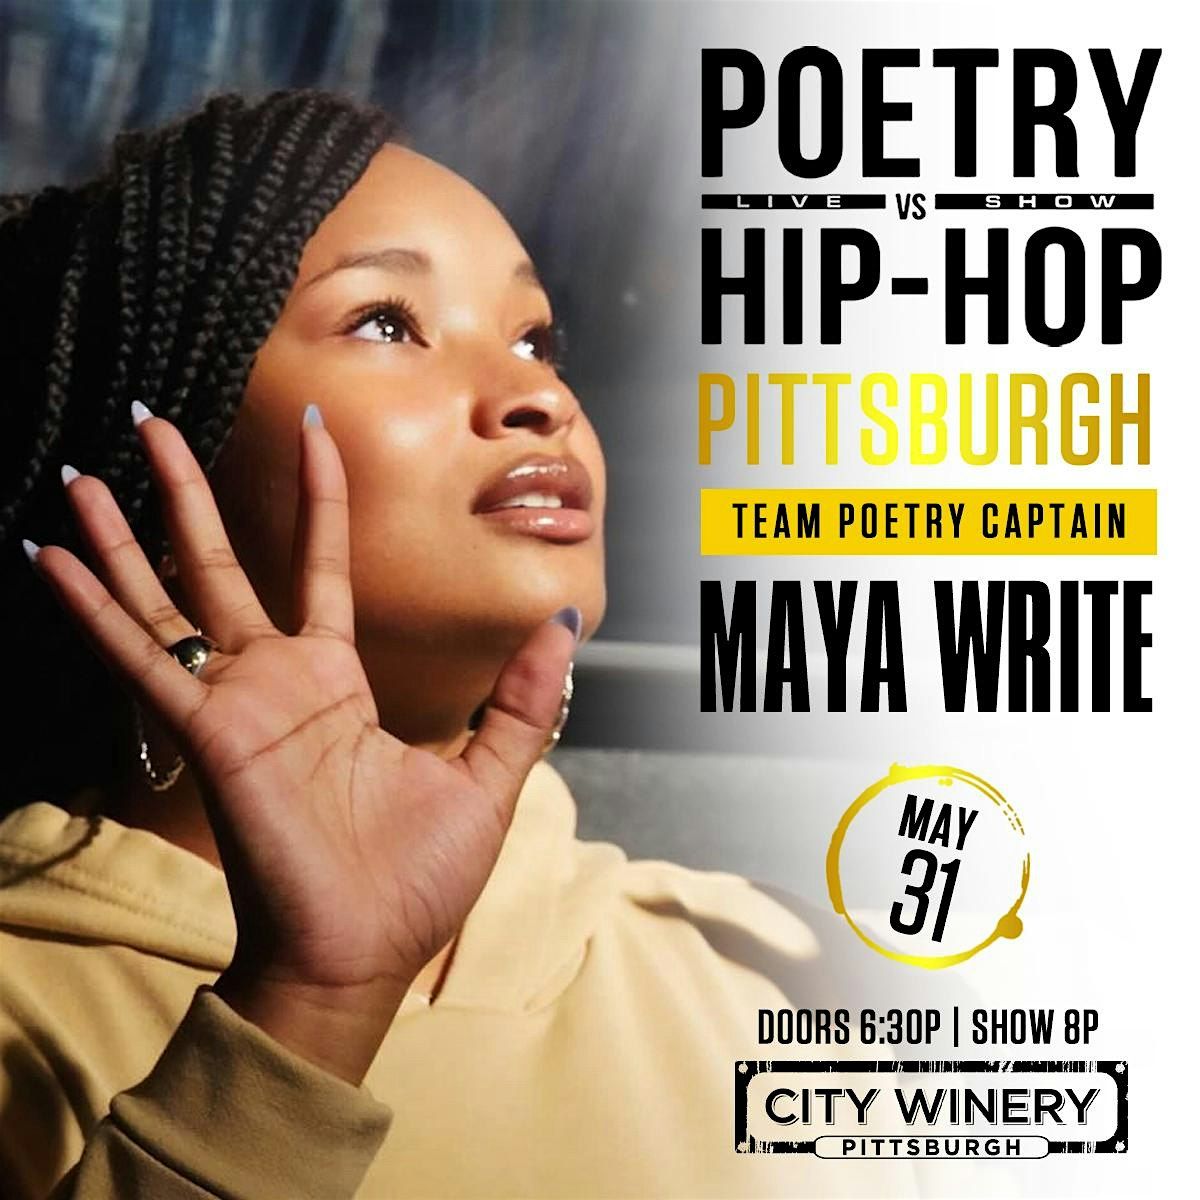 Pittsburgh City Winery x Poetry vs. Hip-Hop Friday May 31st 8P